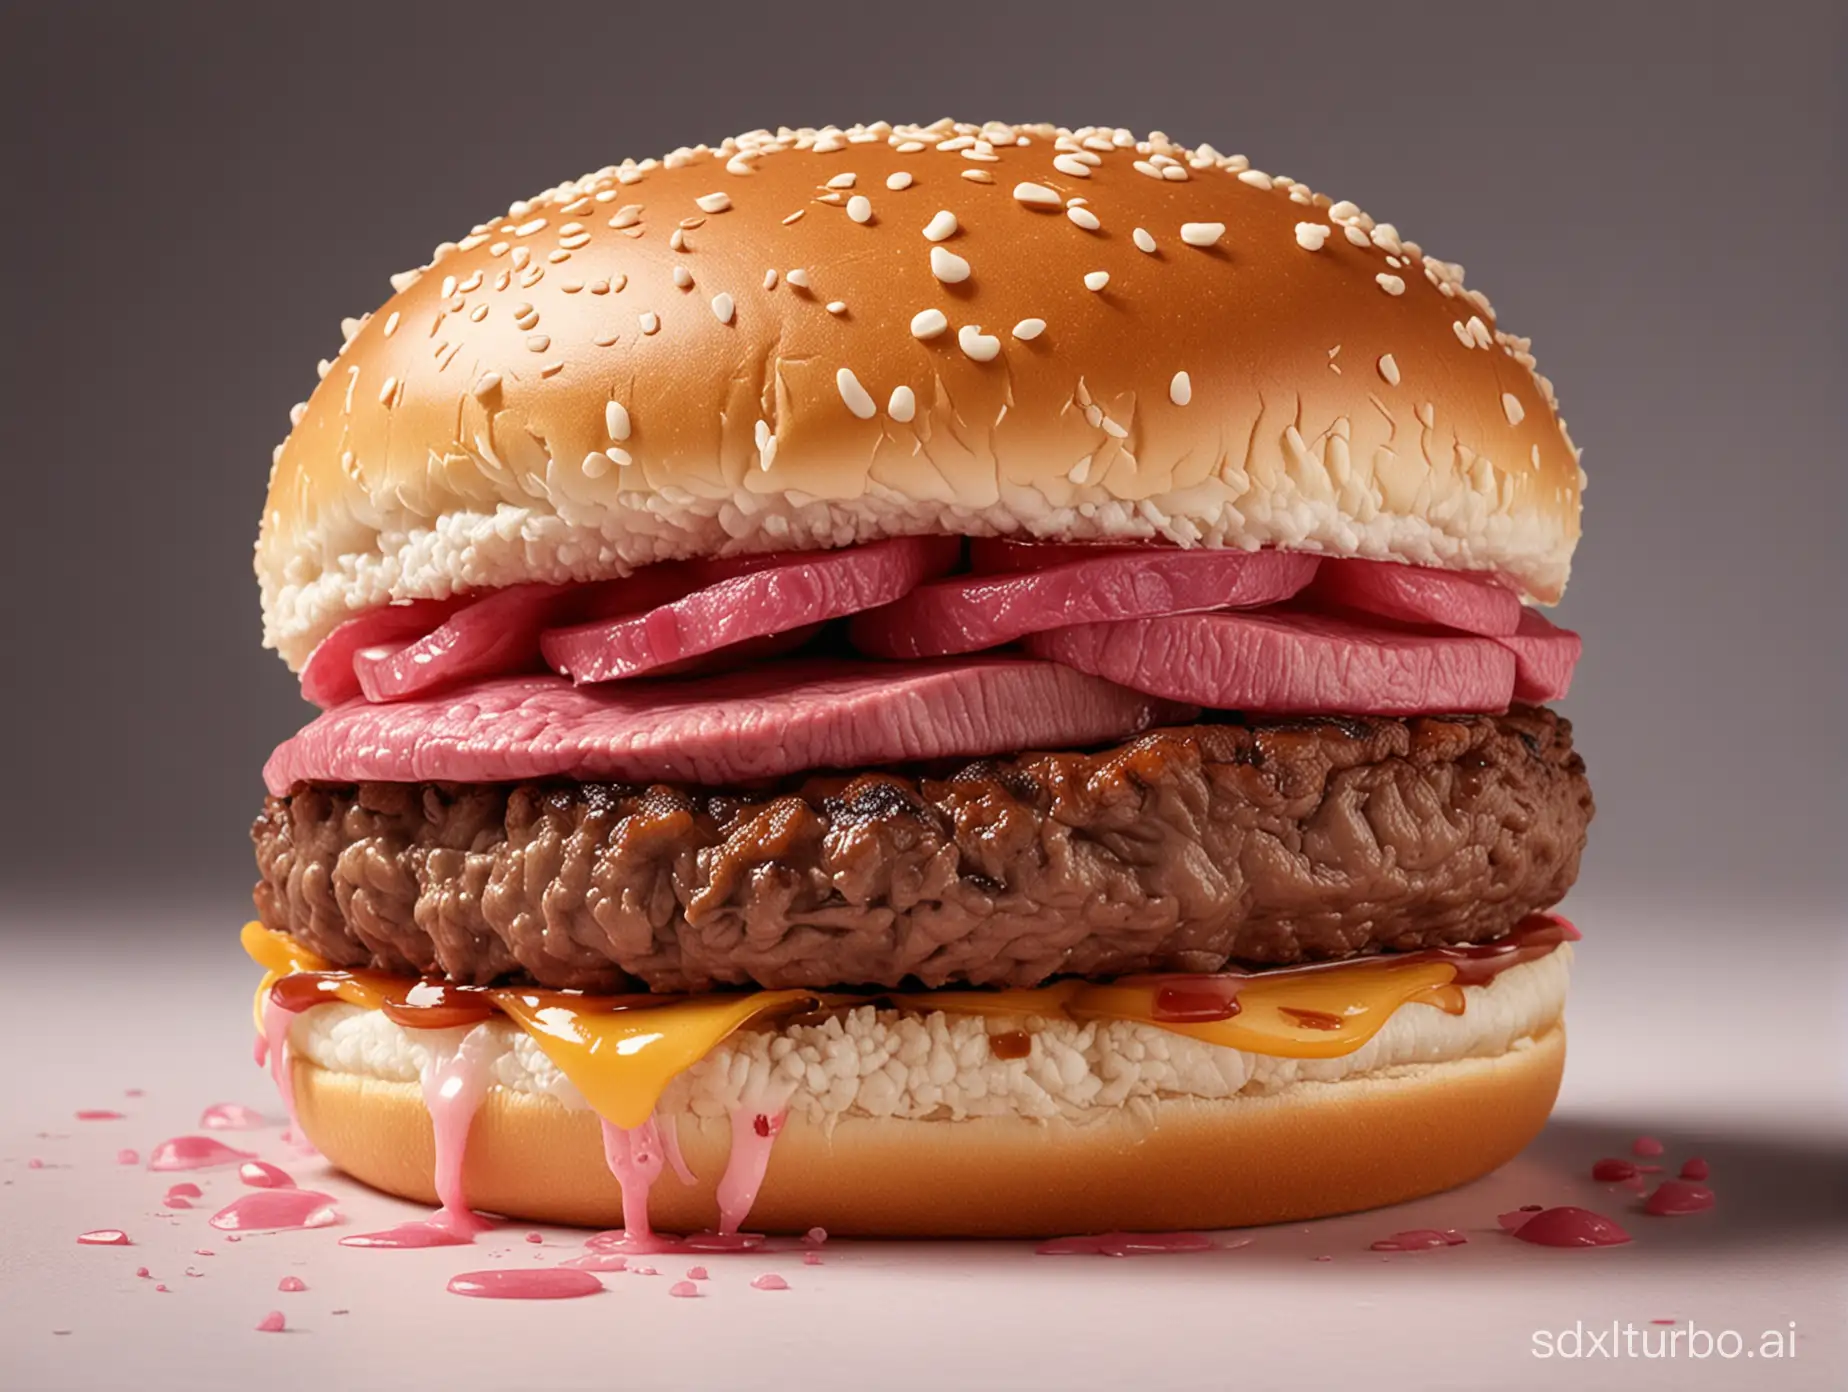 undercoocked burger, hyper realistic, showing meat that is not coocked a srow meat, pimk meat